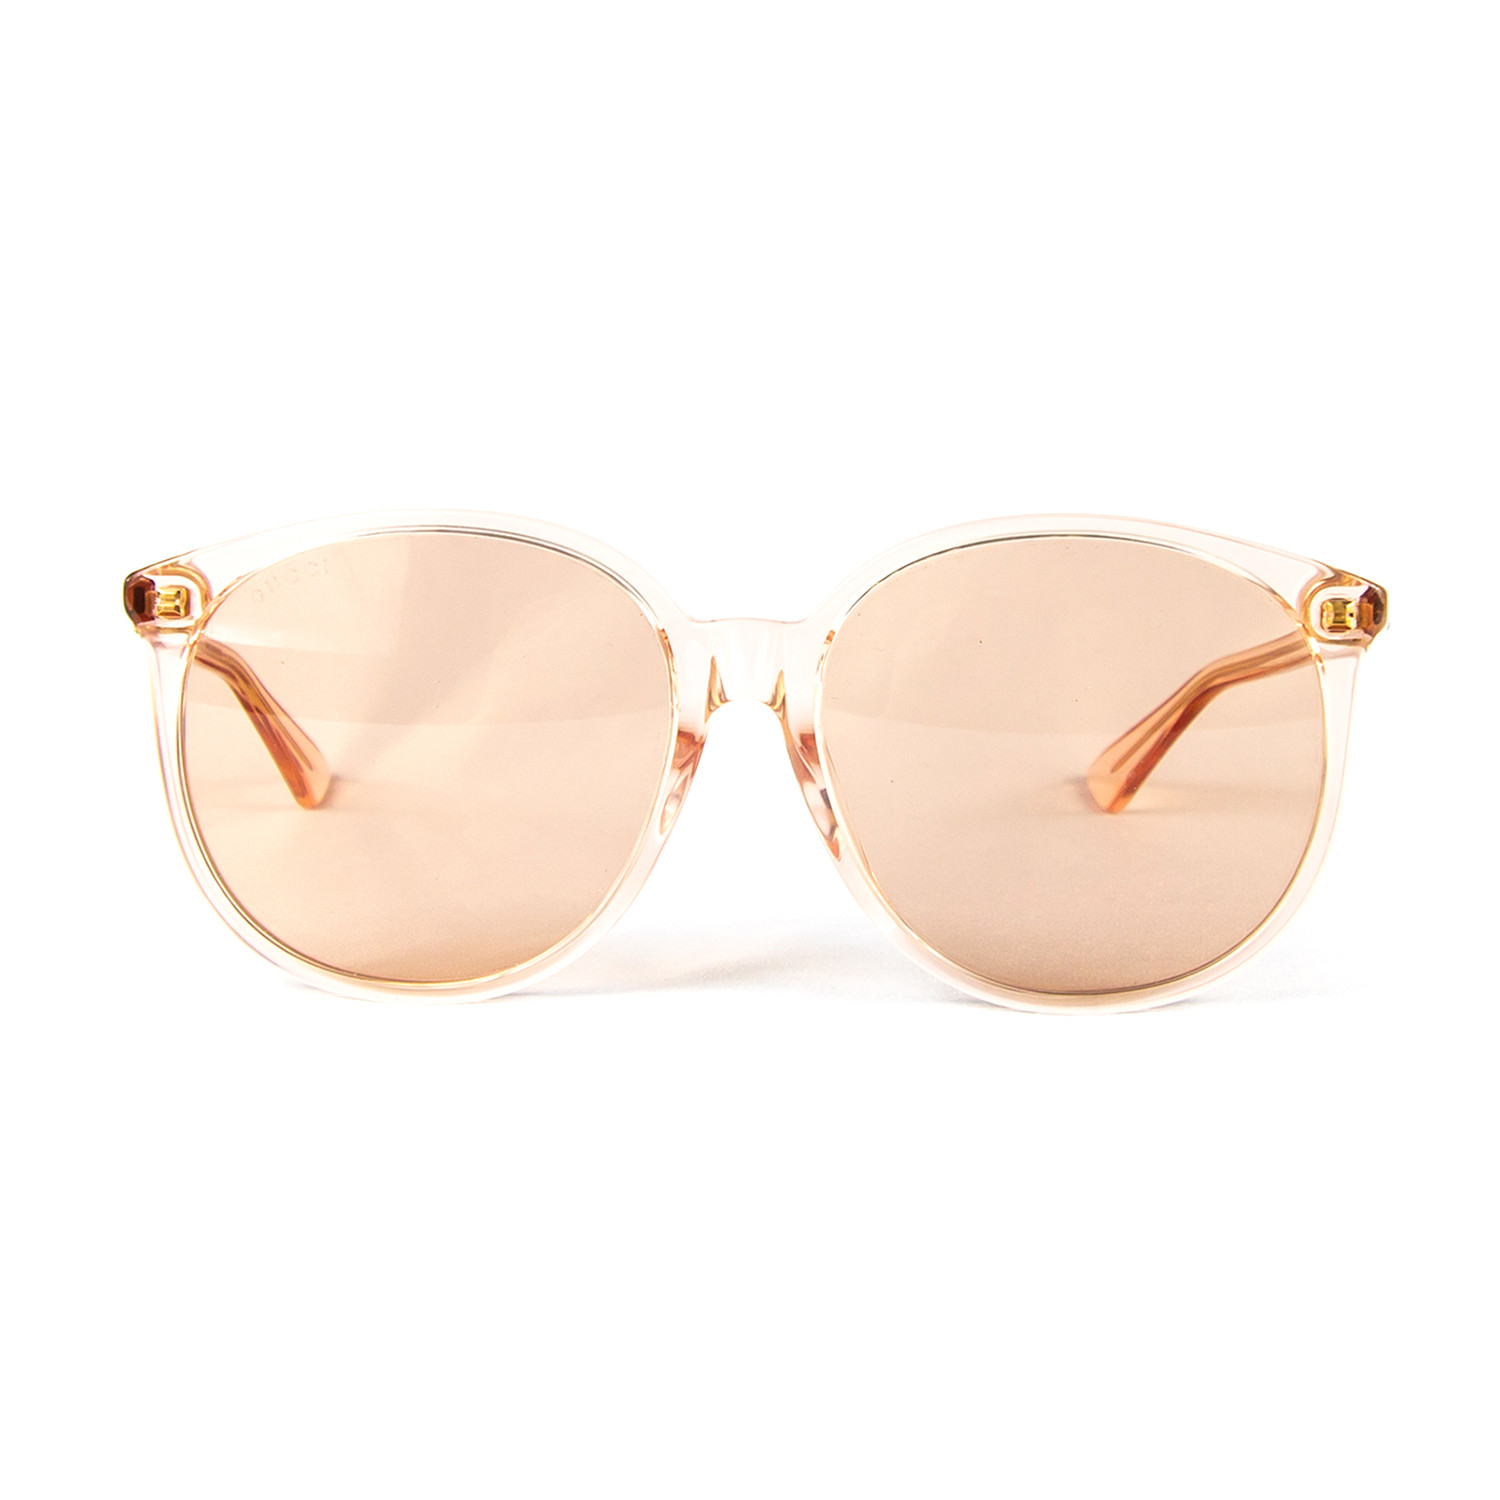 Men's Round Sunglasses // Light Pink - Gucci - Touch of Modern